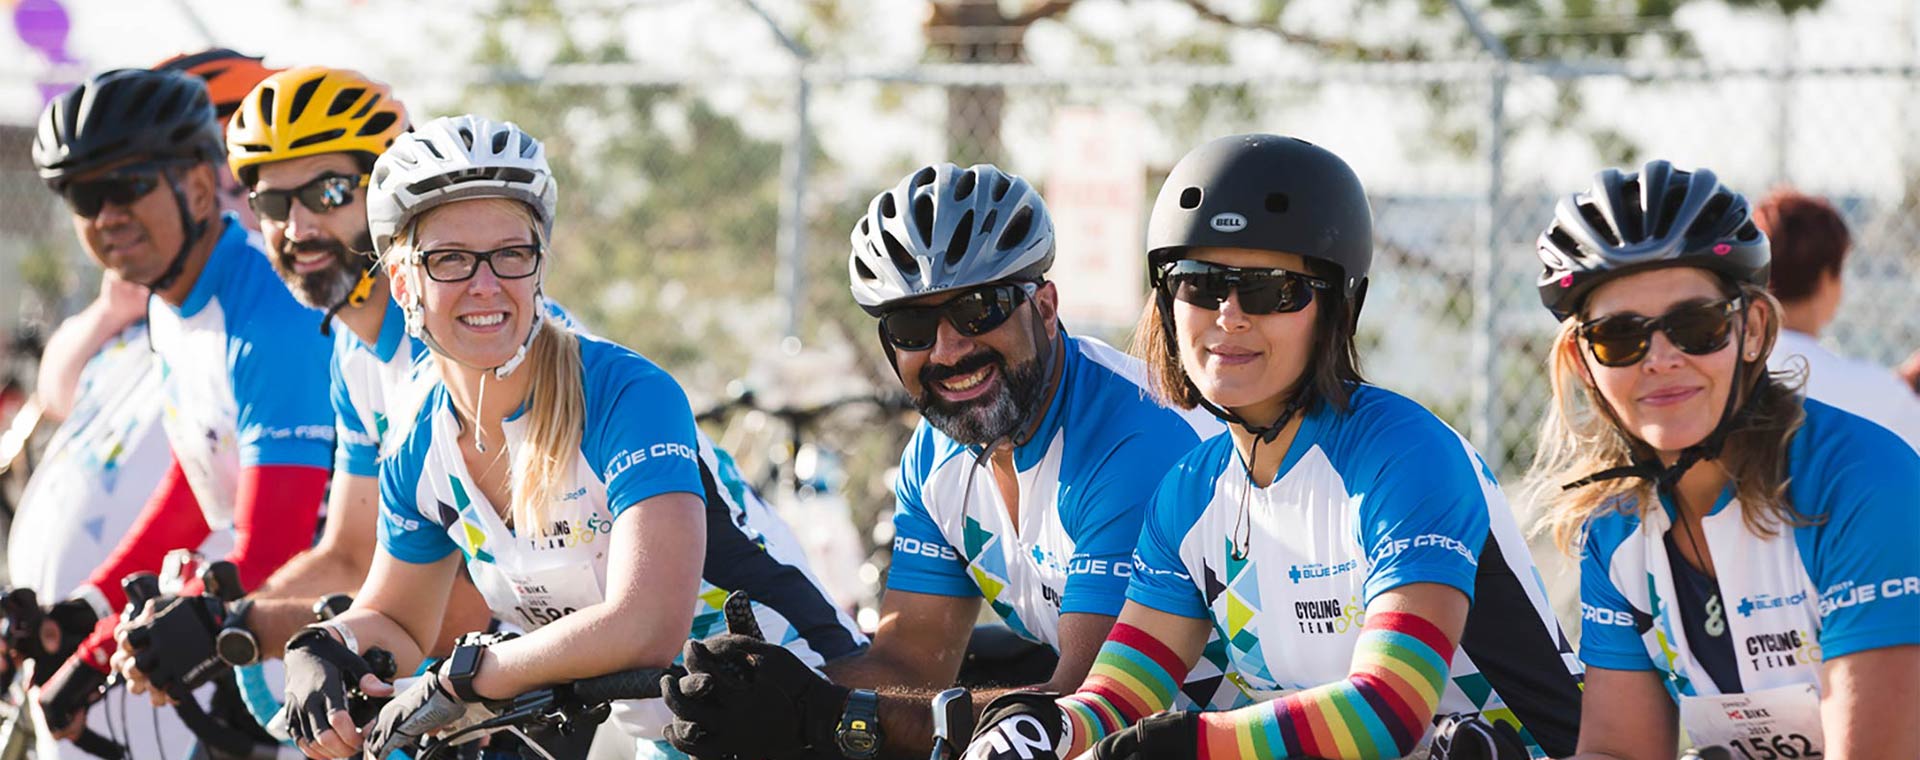 #ThisIsWhyIRide – The fuel behind the 180 Km bike ride for MS